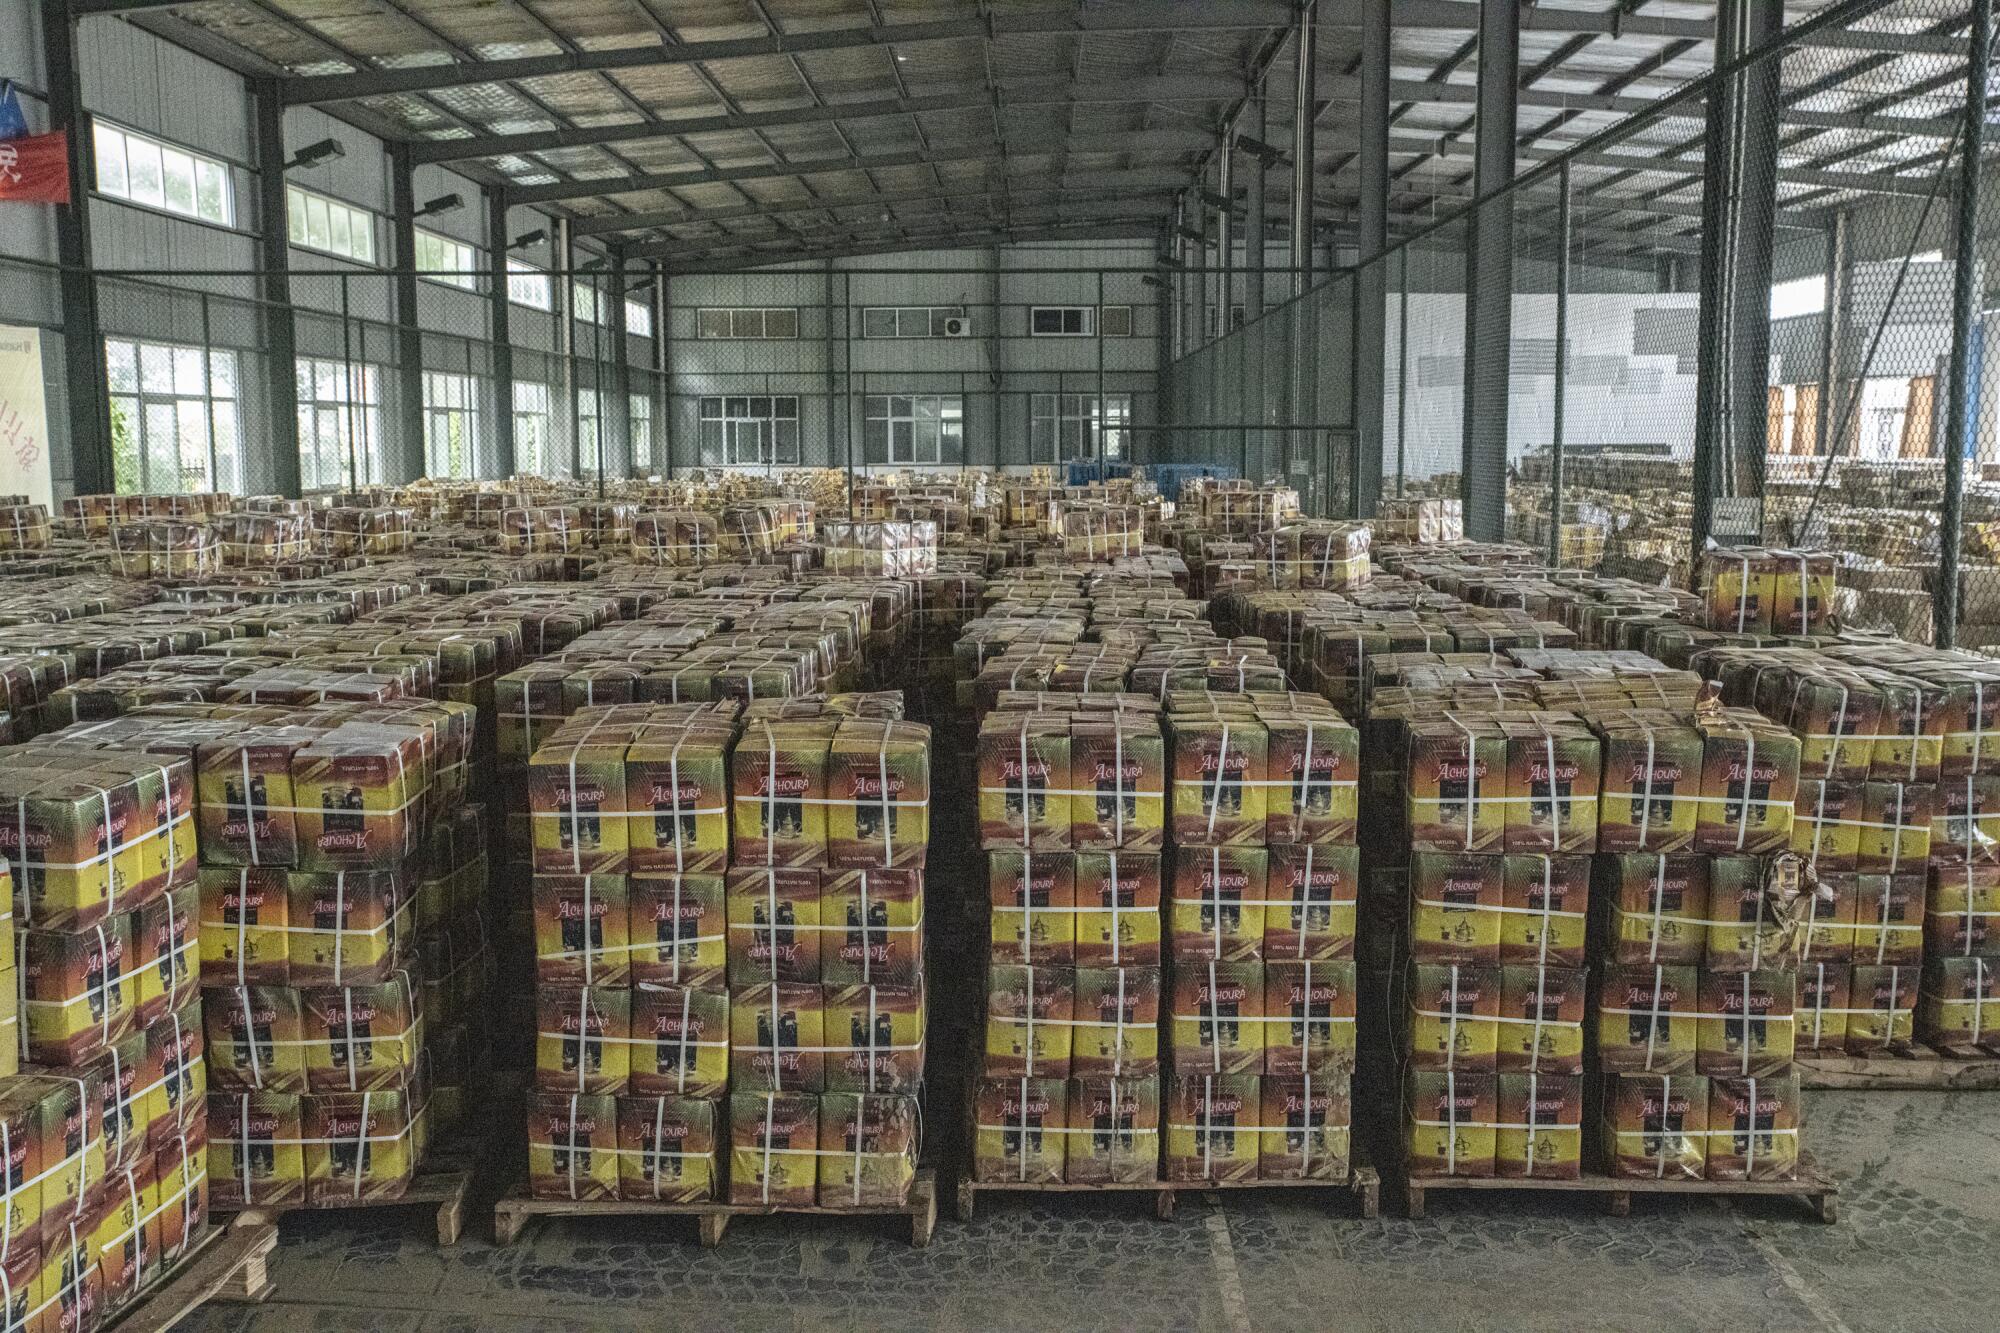 Boxes of soaked tea unfit for sale await disposal at a factory in Shexian, Anhui province.